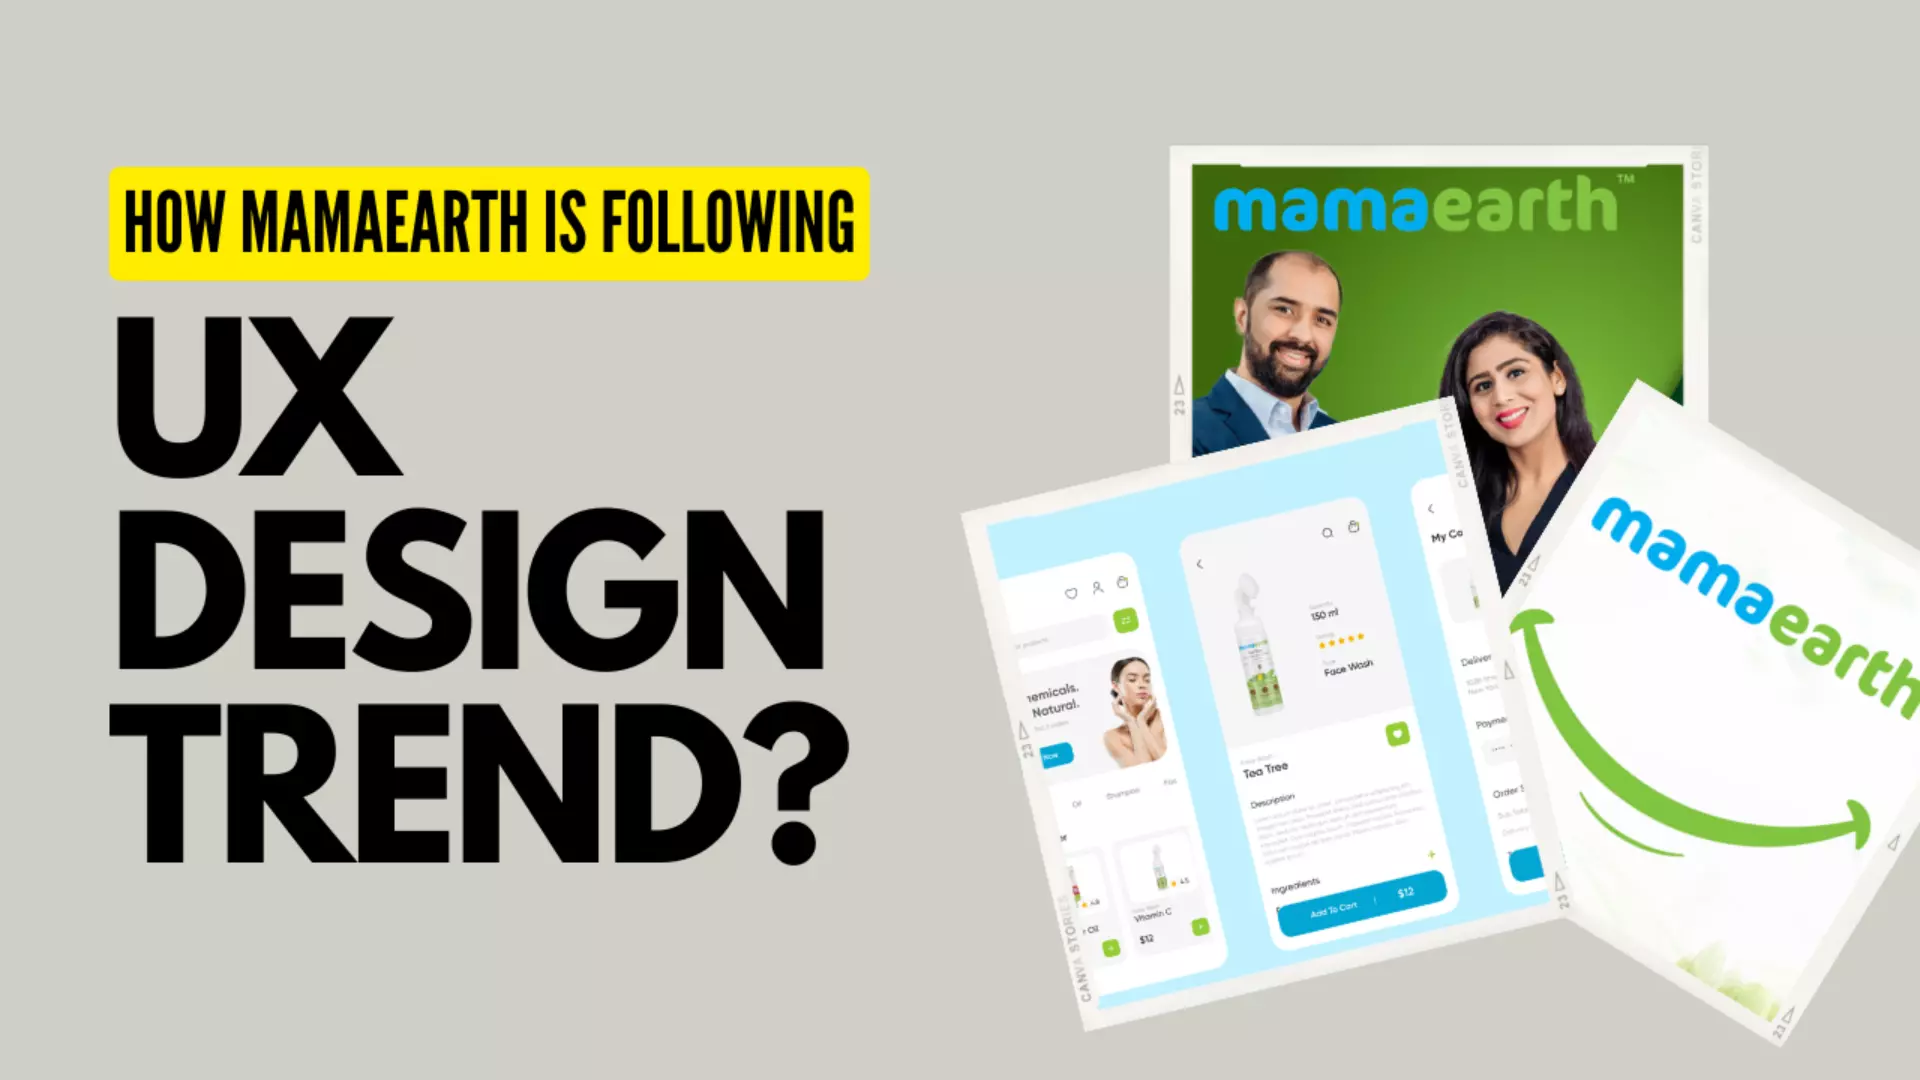 How is Mamaearth Following UX Design Trend